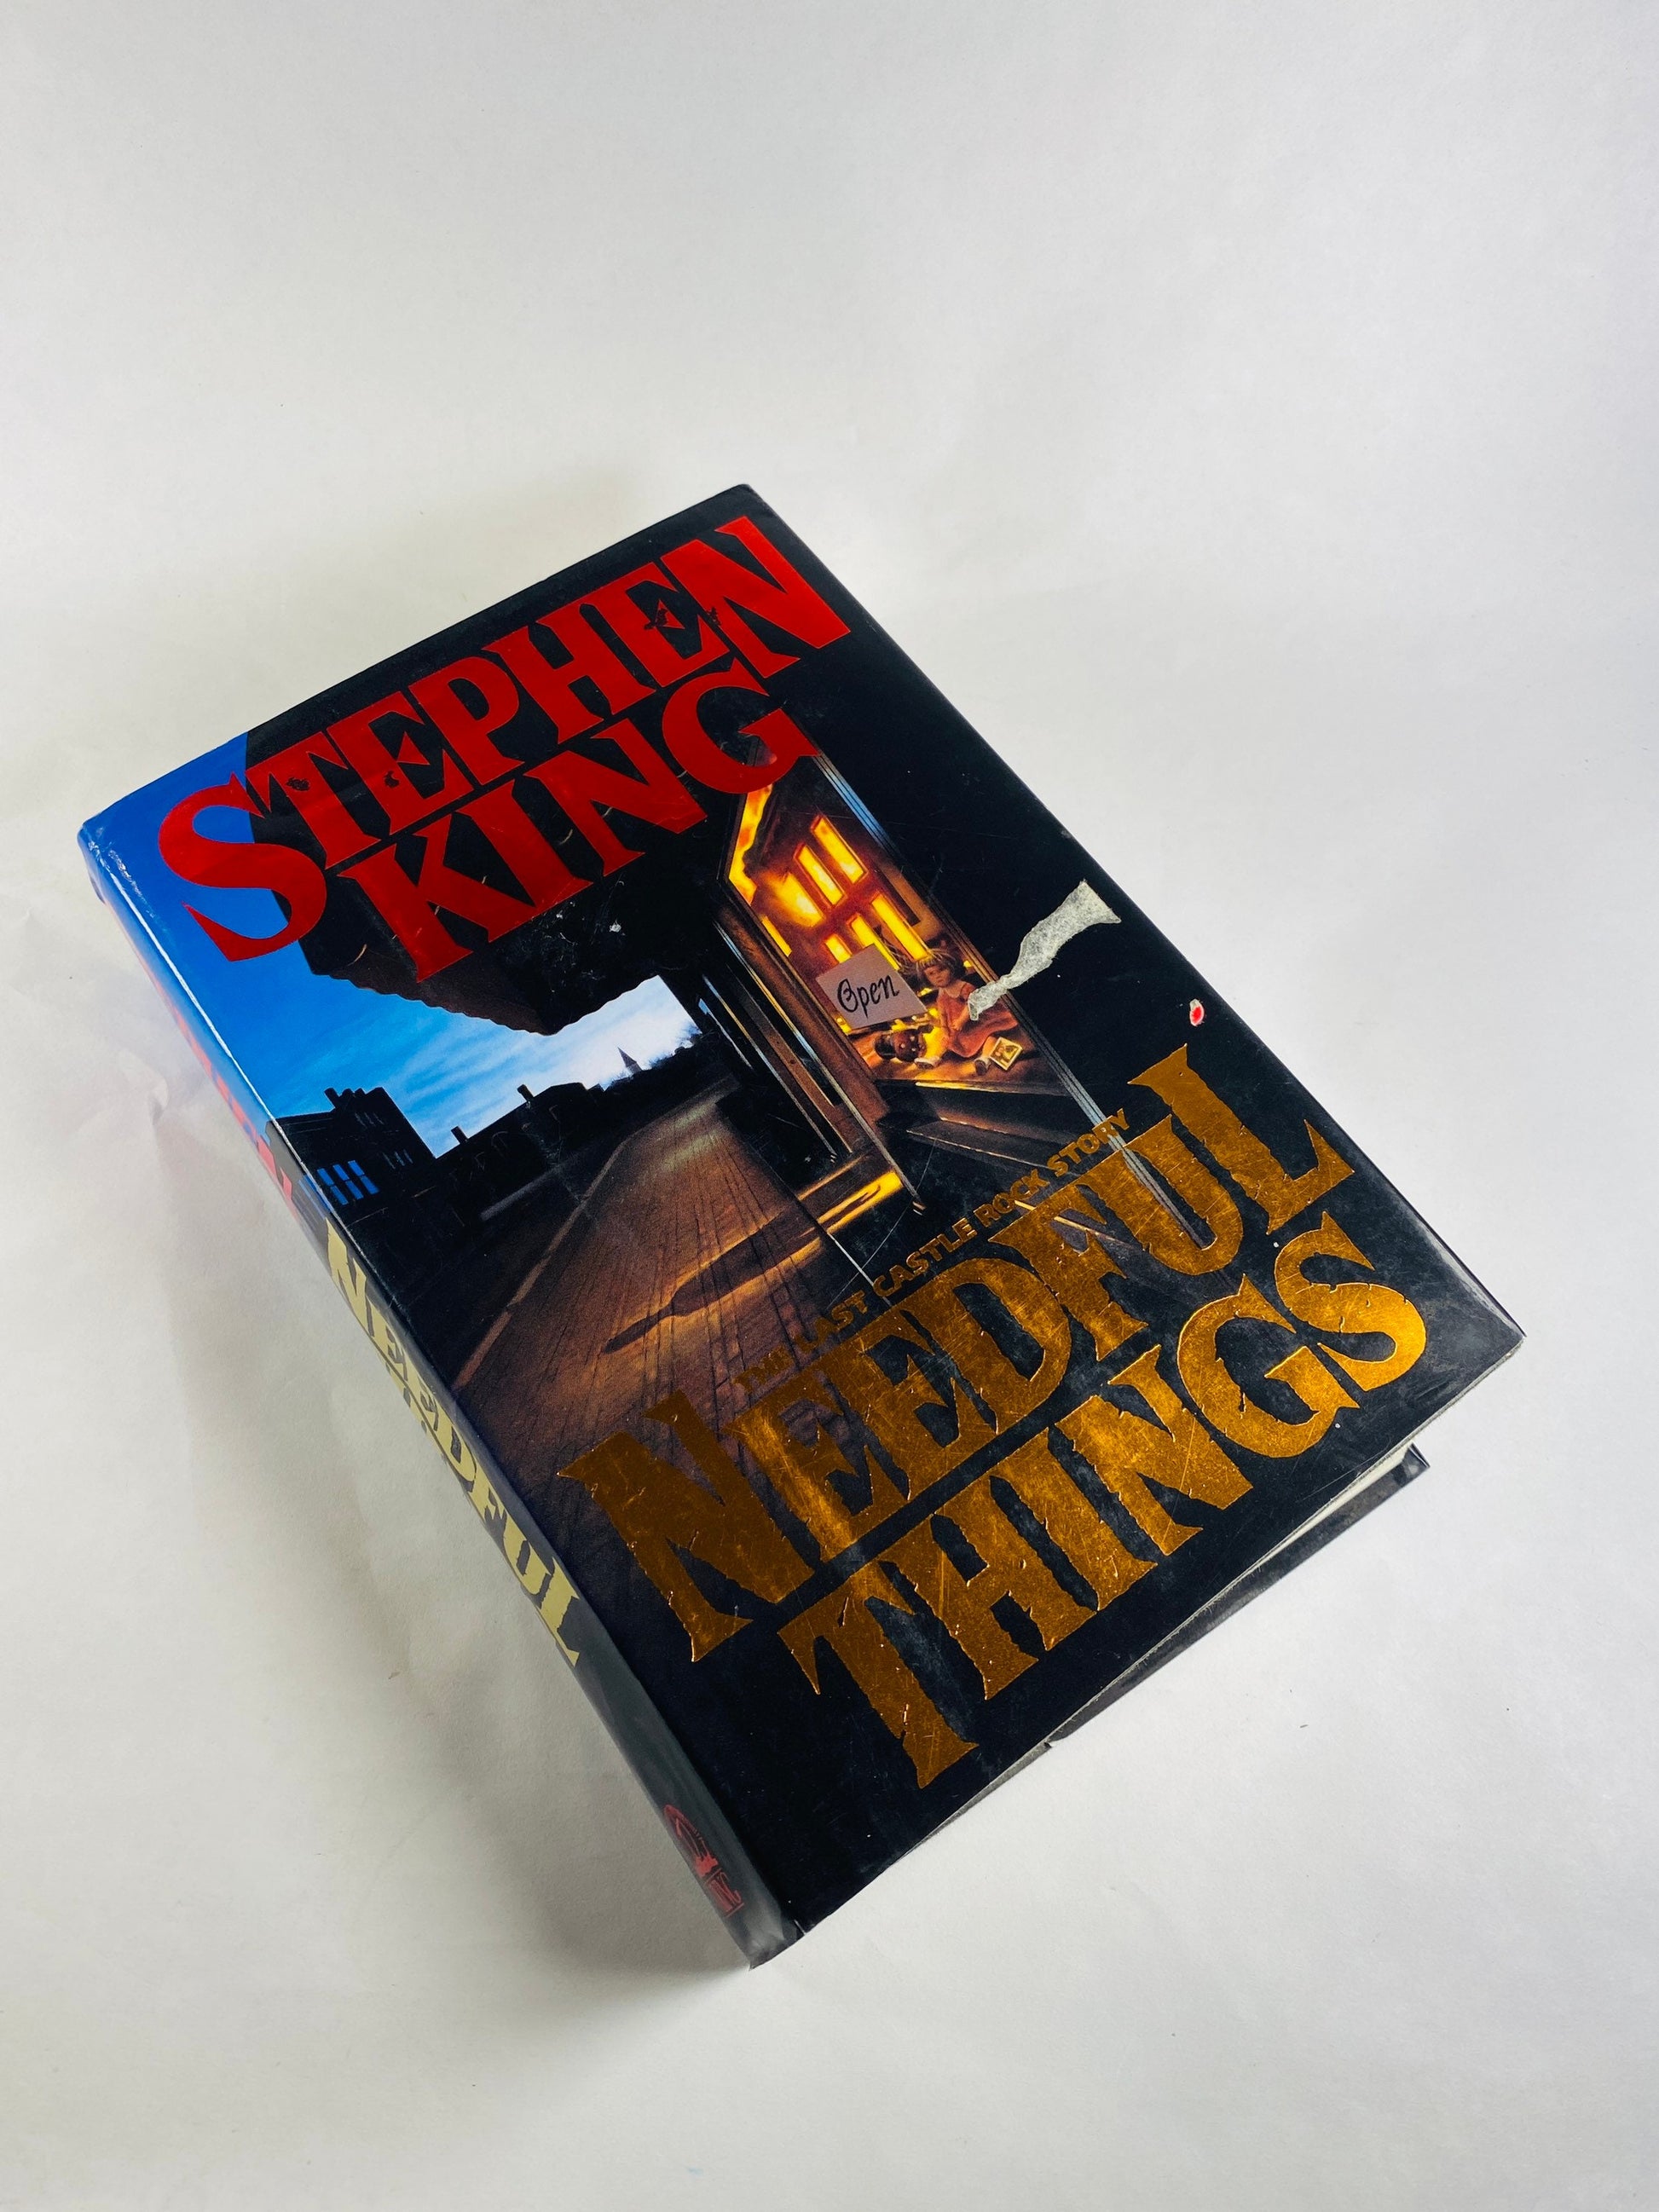 Needful Things by Stephen King FIRST EDITION vintage book circa 1991. Horror & Literary Fiction. Gift for book lover. Collectible